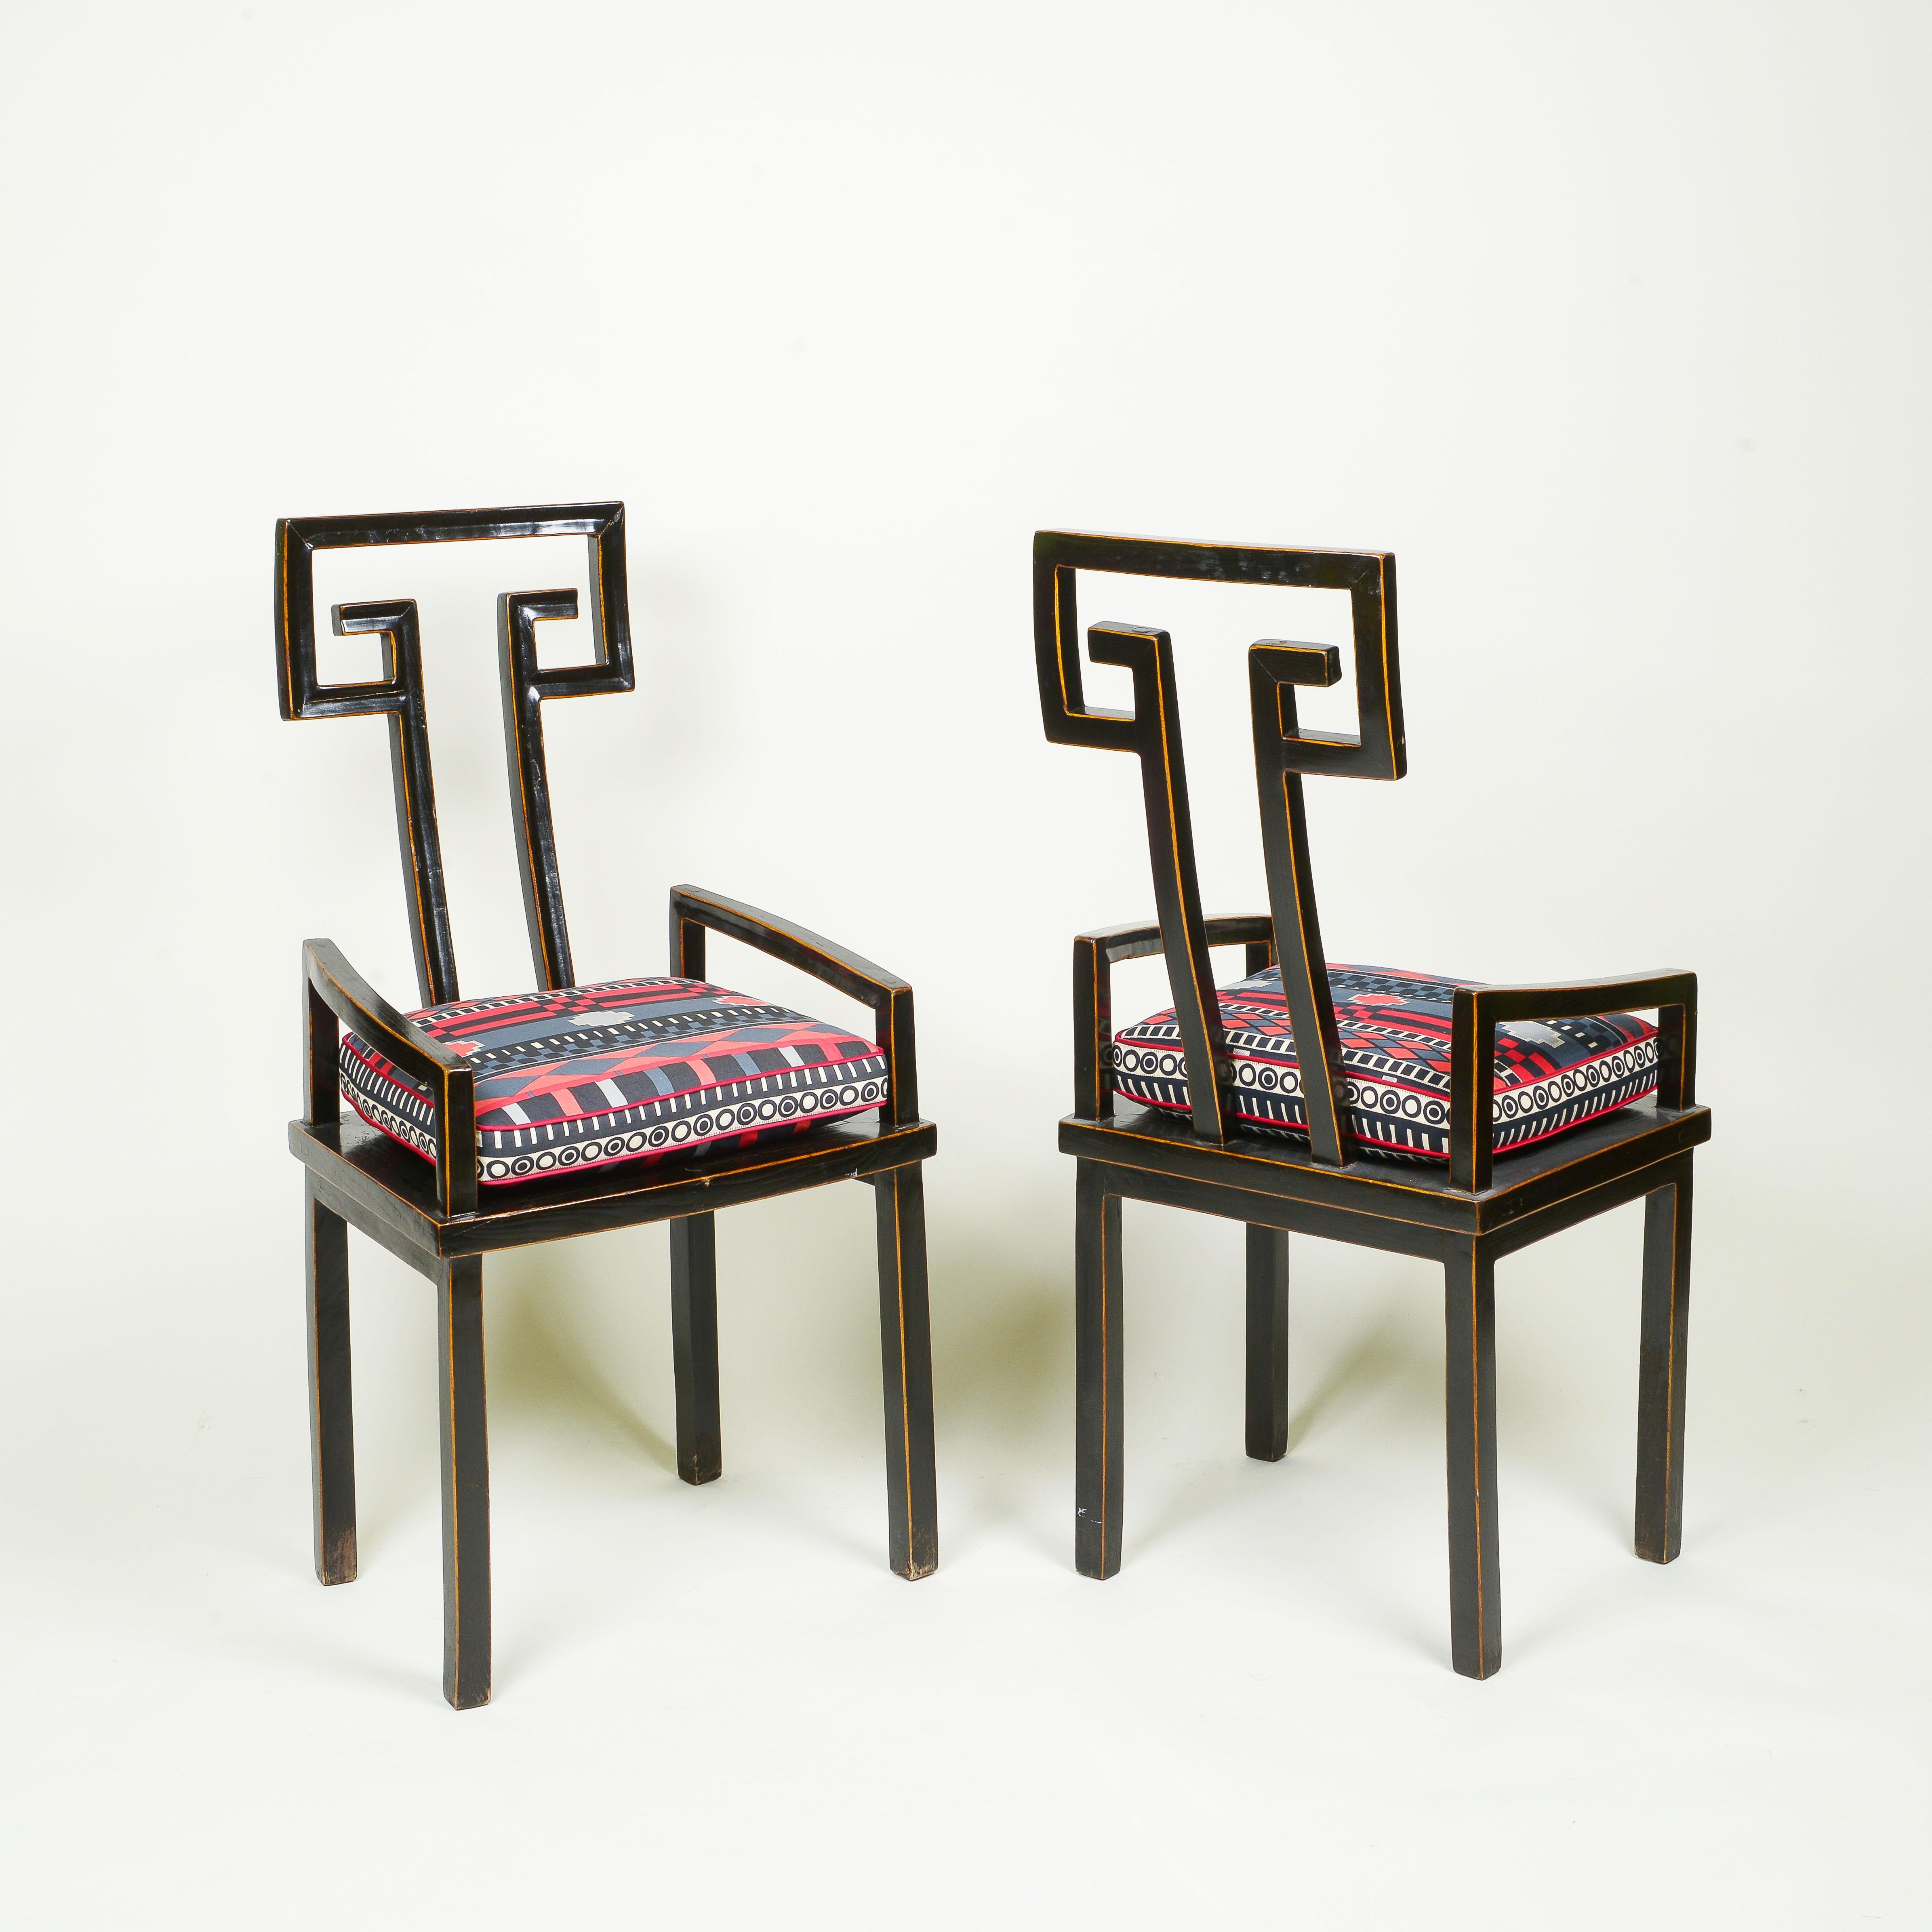 With Greek key open backplate; on straight square legs; the squab seat cushion made of vintage Yves Saint Laurent fabric.